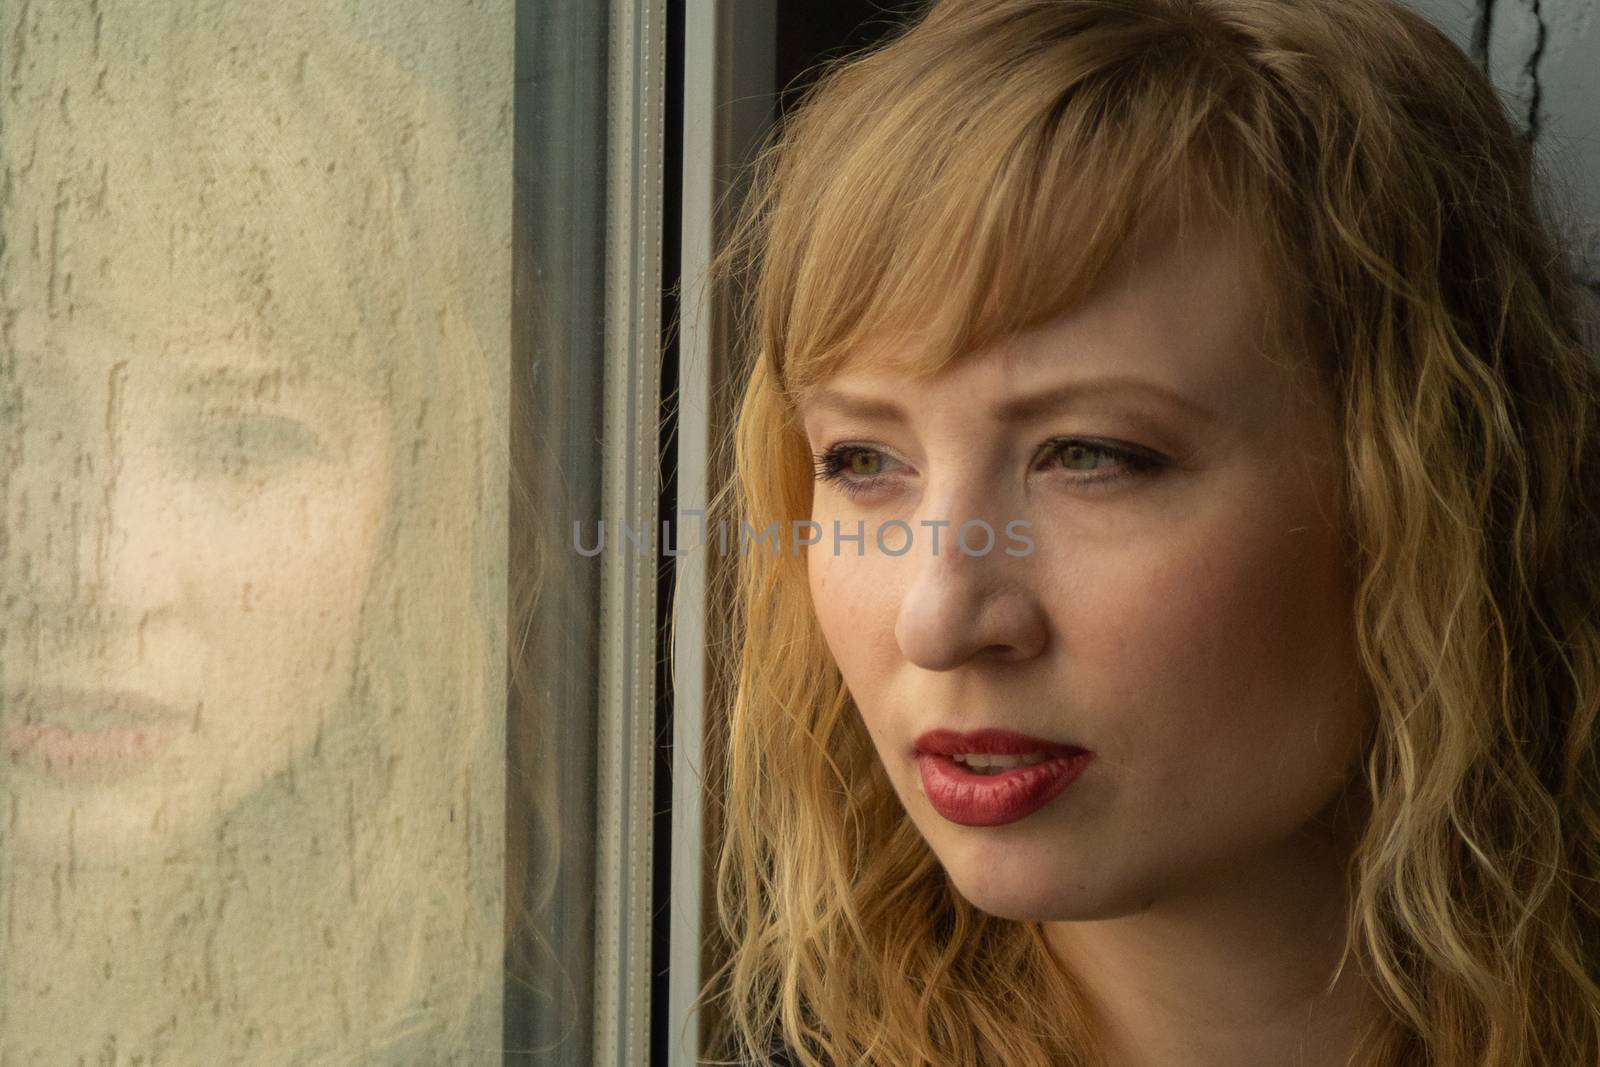 A woman of 30 years with blond hair near the window, you can see her reflection. Close-up